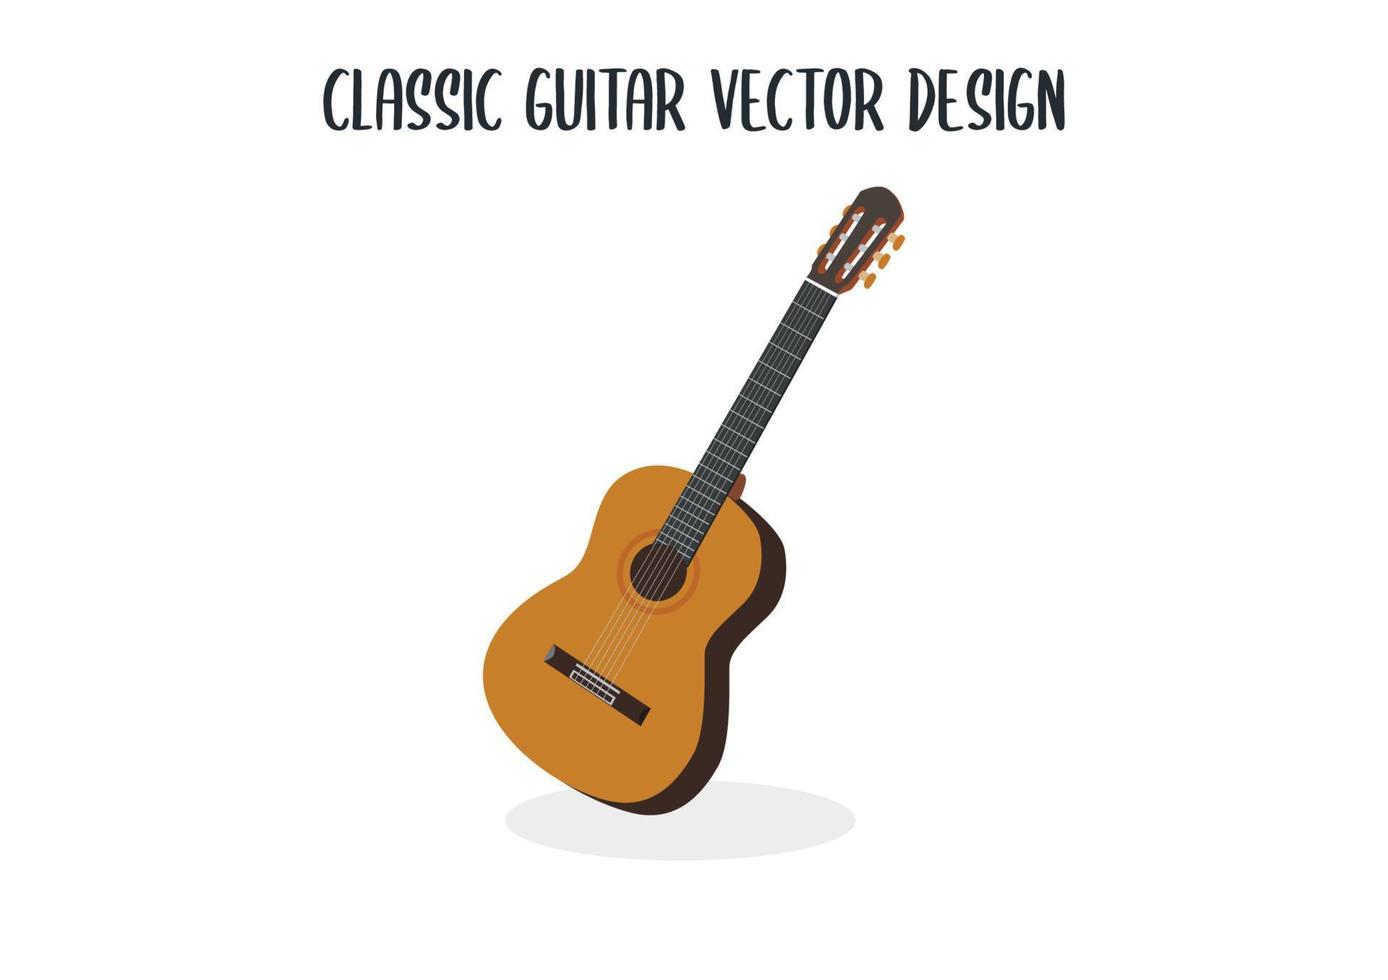 Classic guitar vector design. Classic guitar flat style vector illustration isolated on white background. Acoustic guitar. String musical instruments. Classic guitar clipart